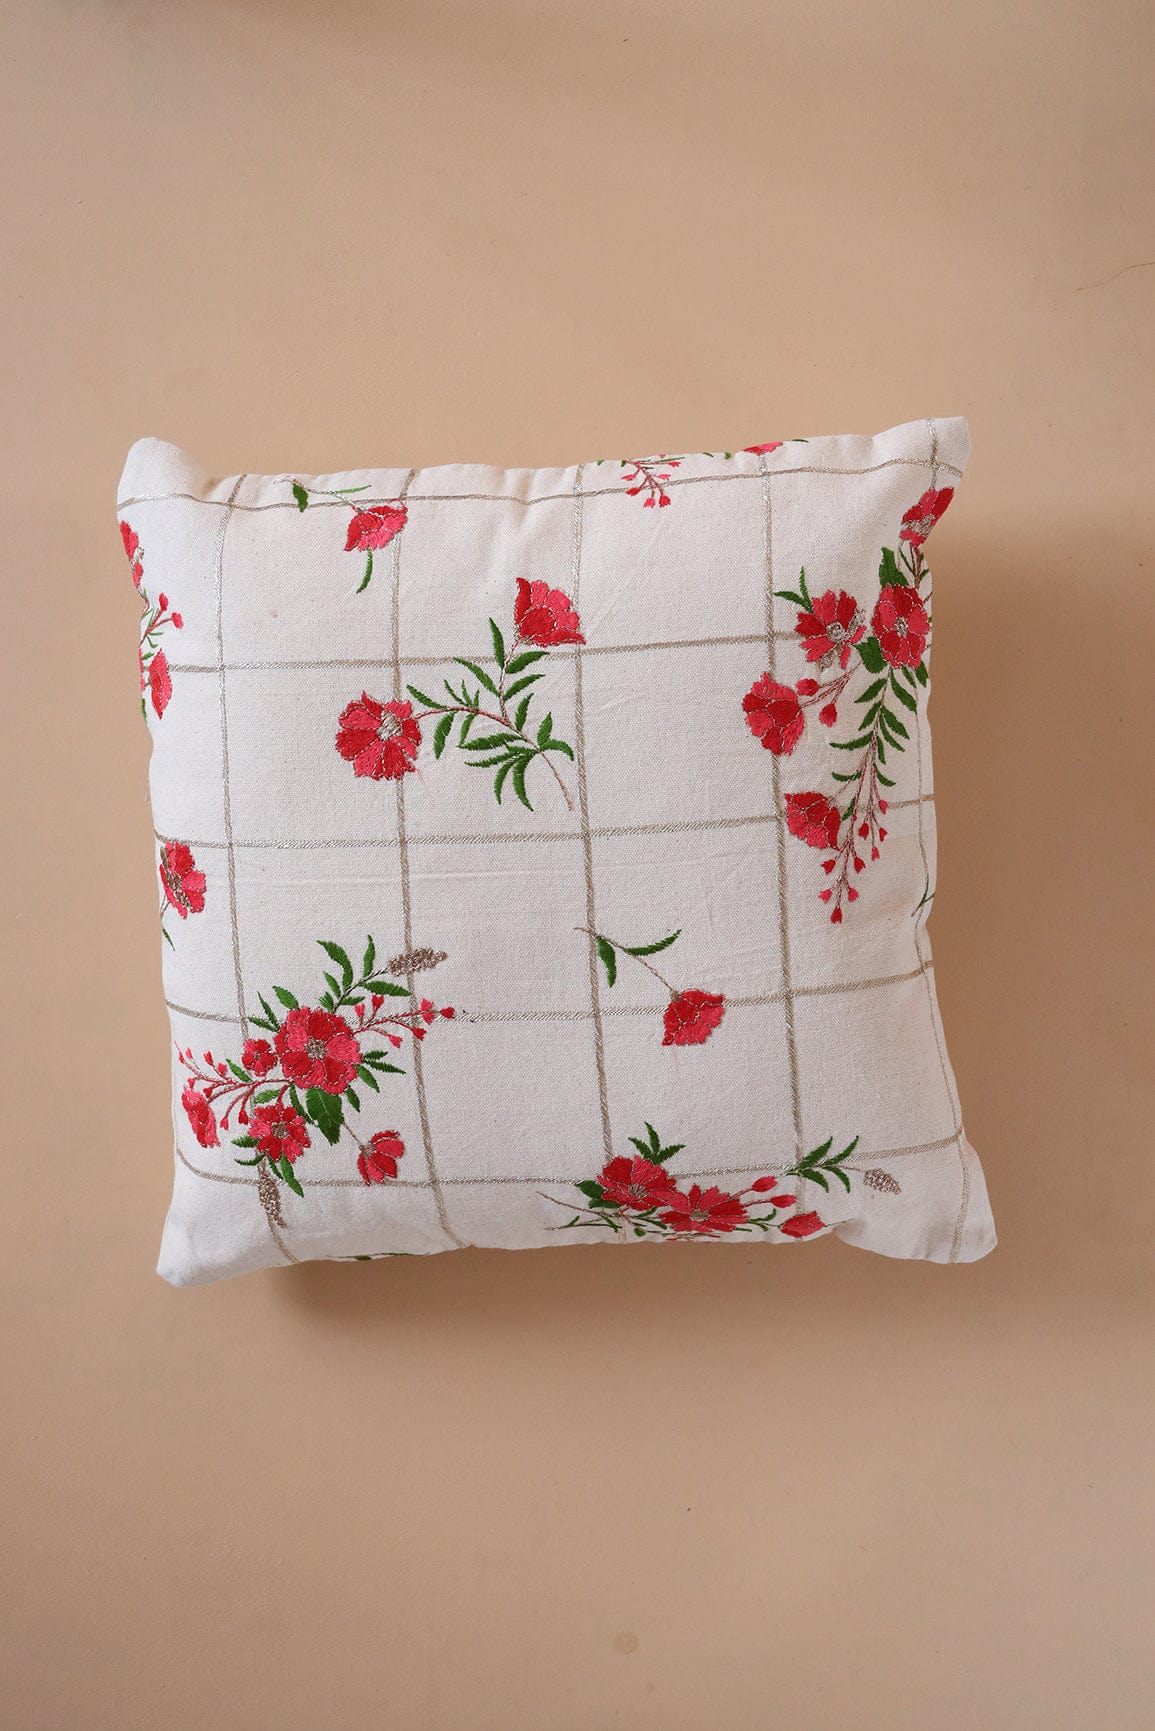 doeraa Silver checks & Floral Pattern Embroidery on off white cotton Cushion Cover (16*16 inches)